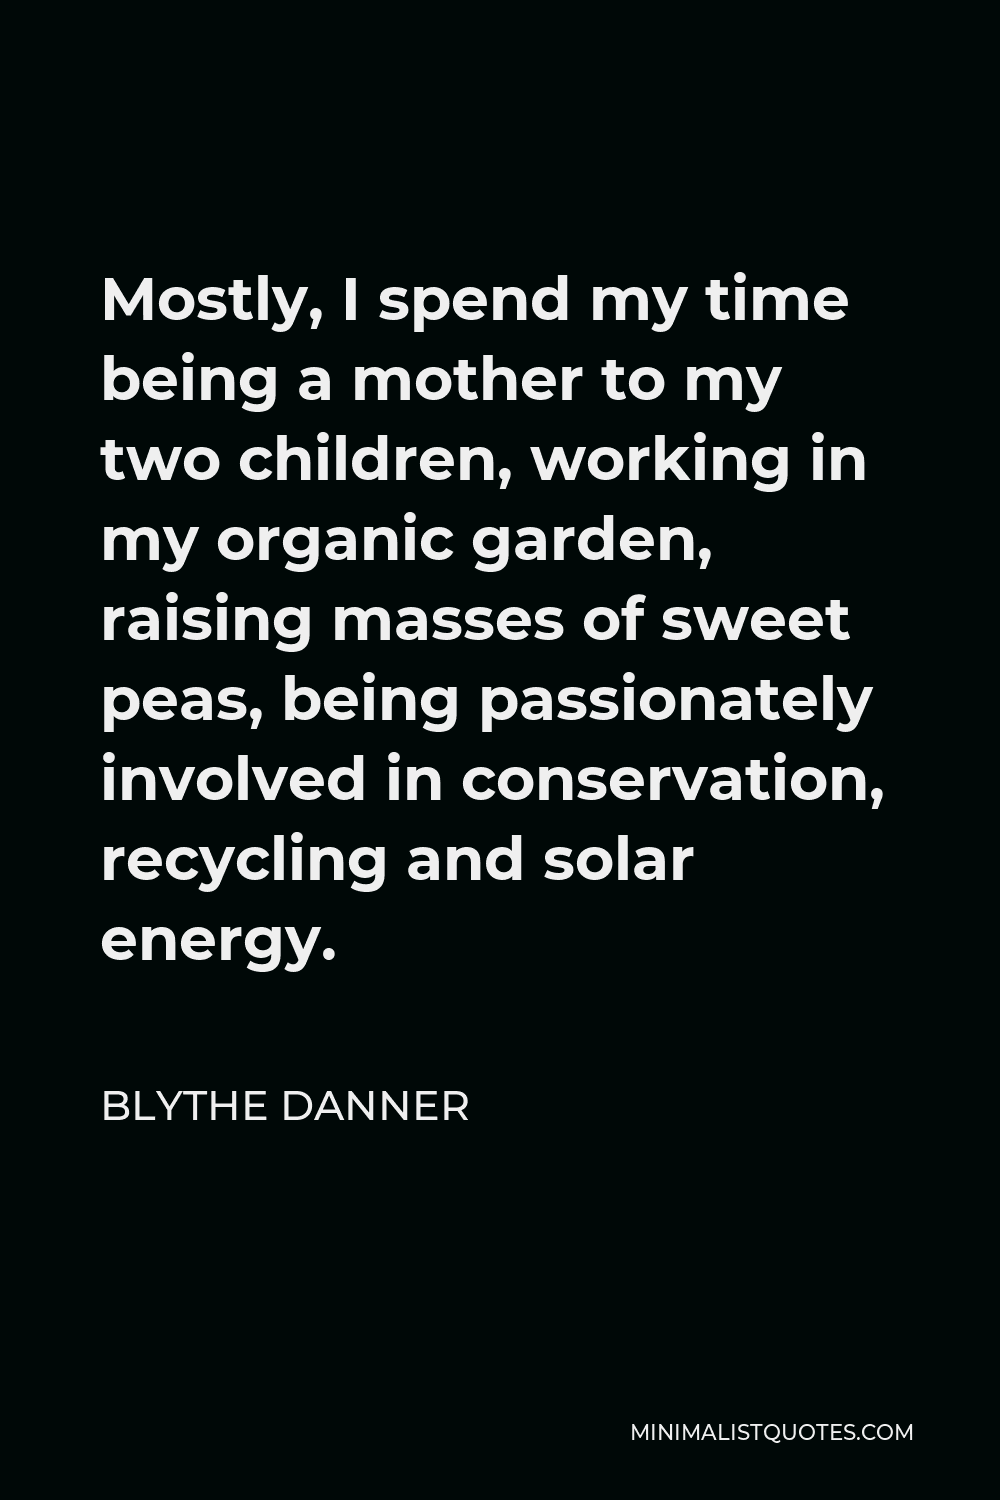 Blythe Danner Quote - Mostly, I spend my time being a mother to my two children, working in my organic garden, raising masses of sweet peas, being passionately involved in conservation, recycling and solar energy.